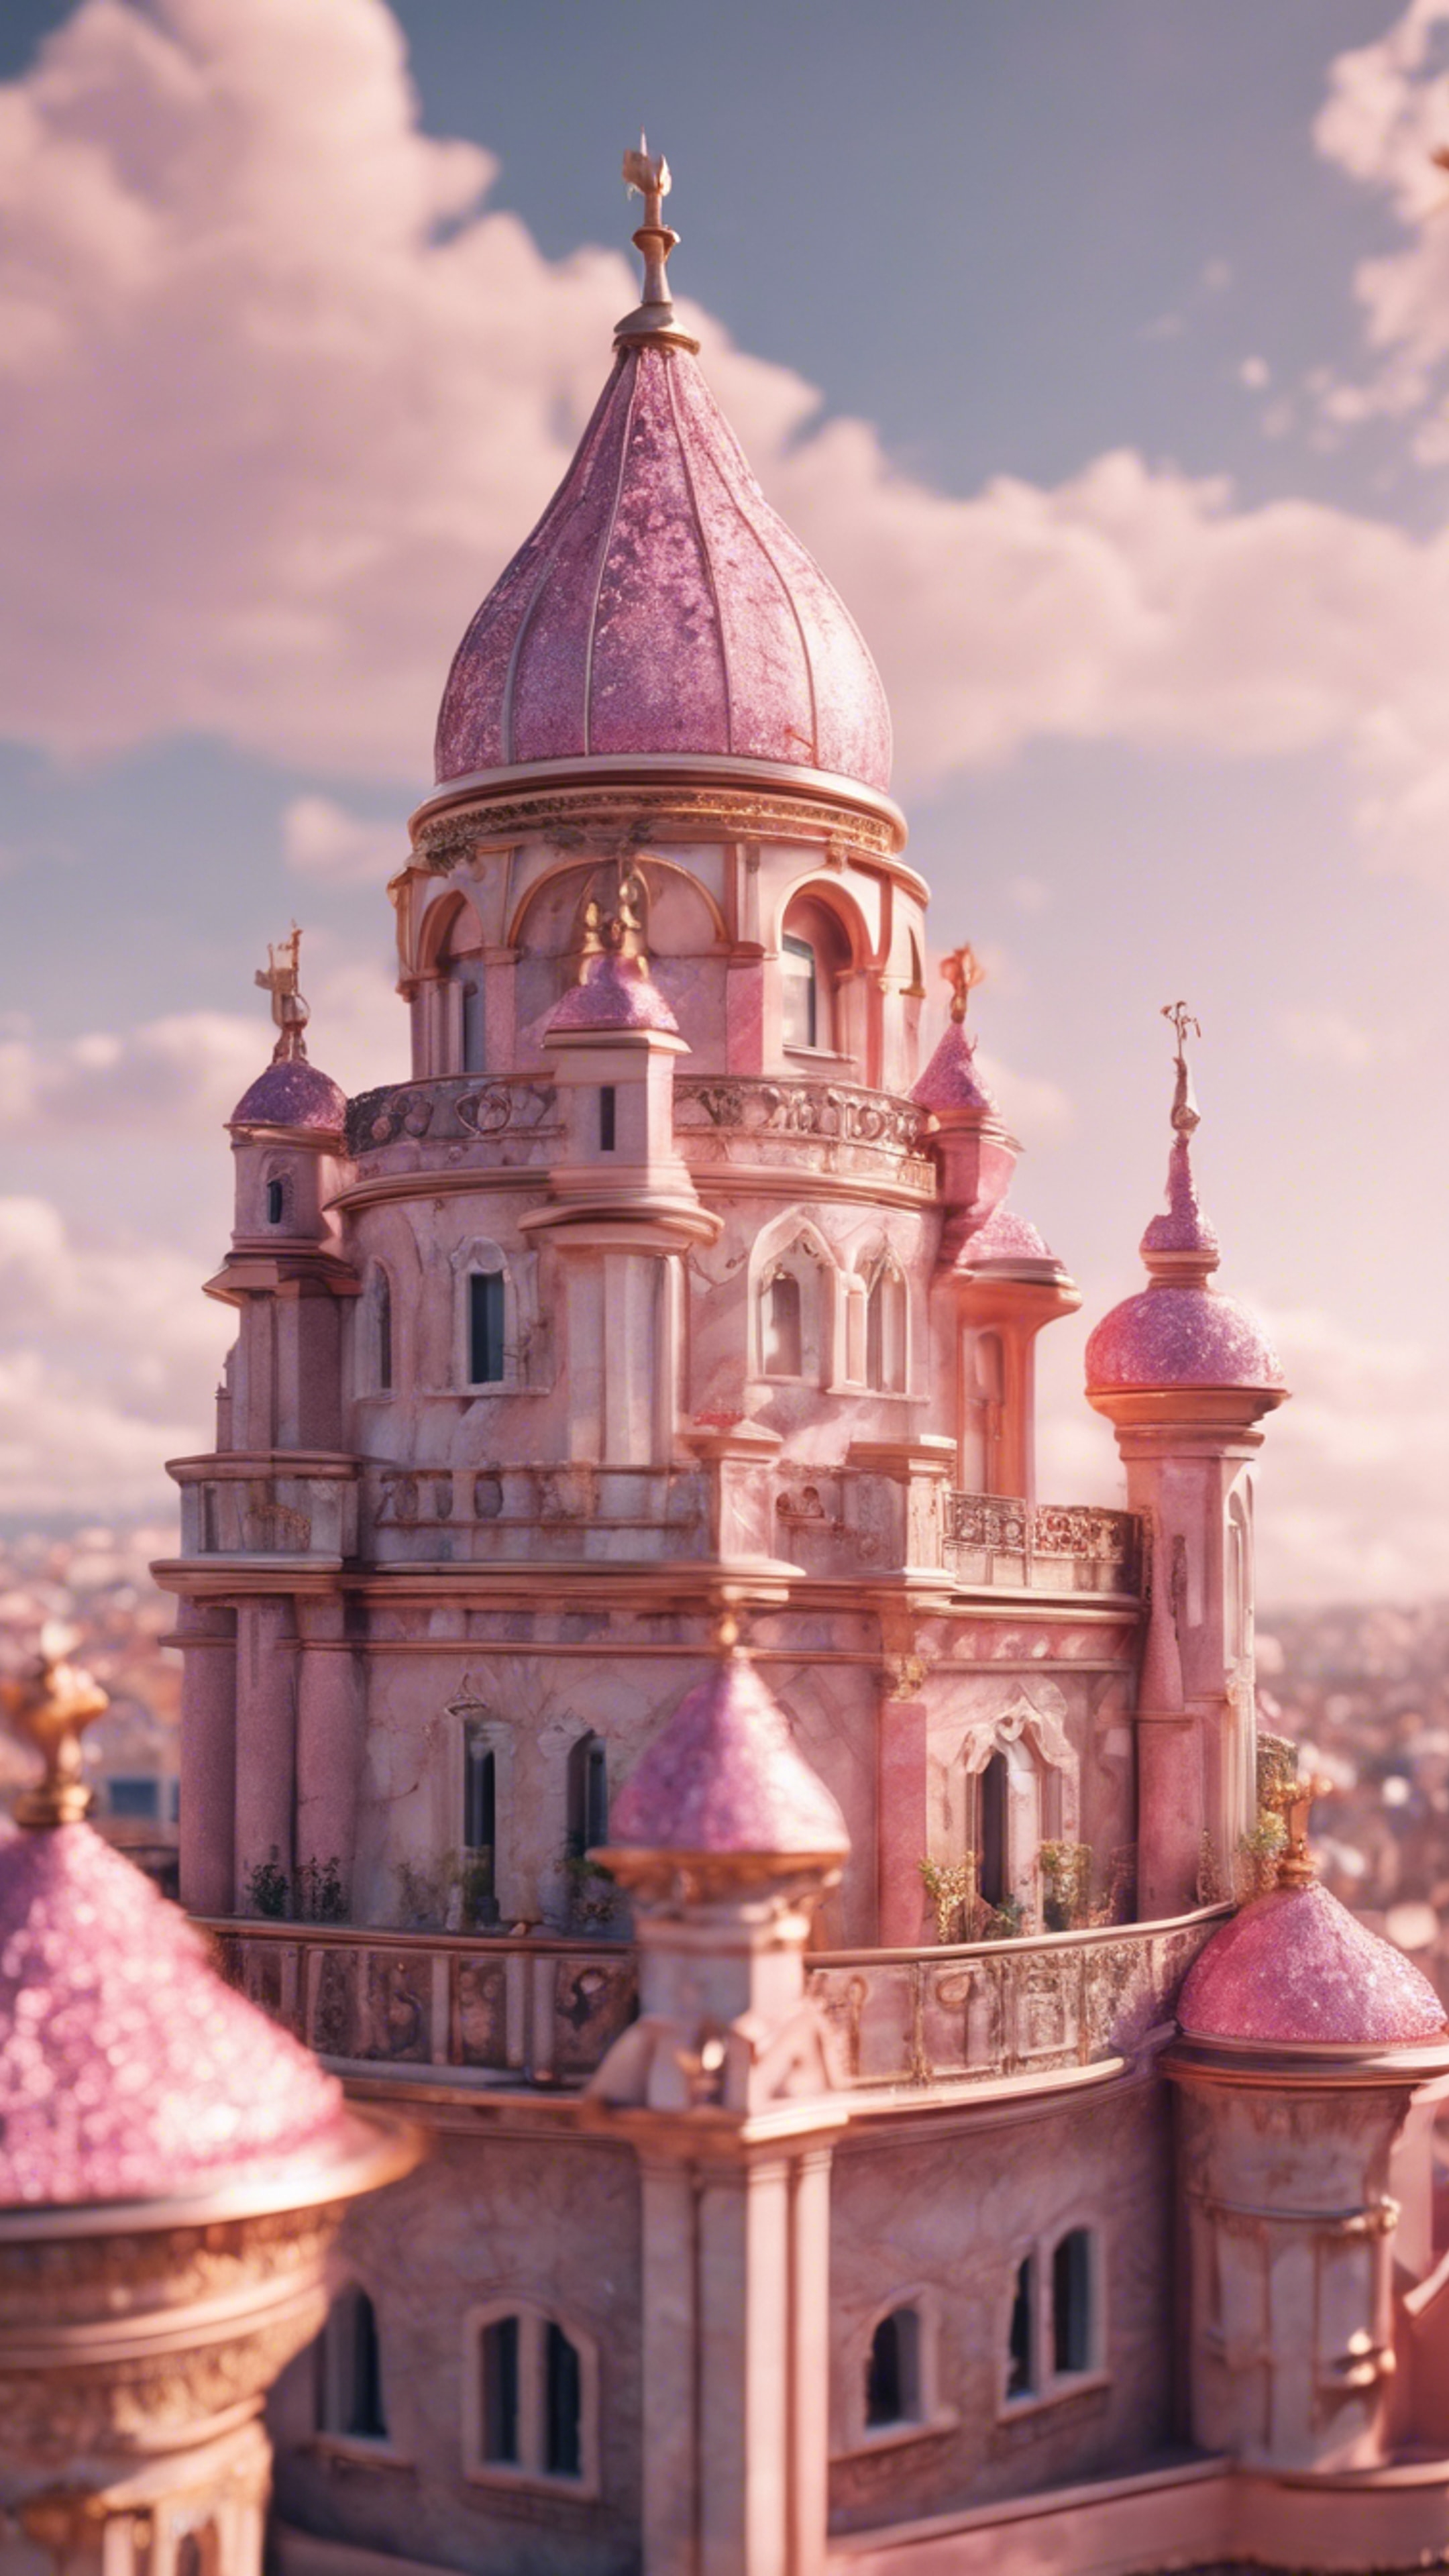 An ornate pink marble castle with glimmering golden rooftops during a sunny afternoon. Tapeta[39cdf807c12f4b9c8dd2]